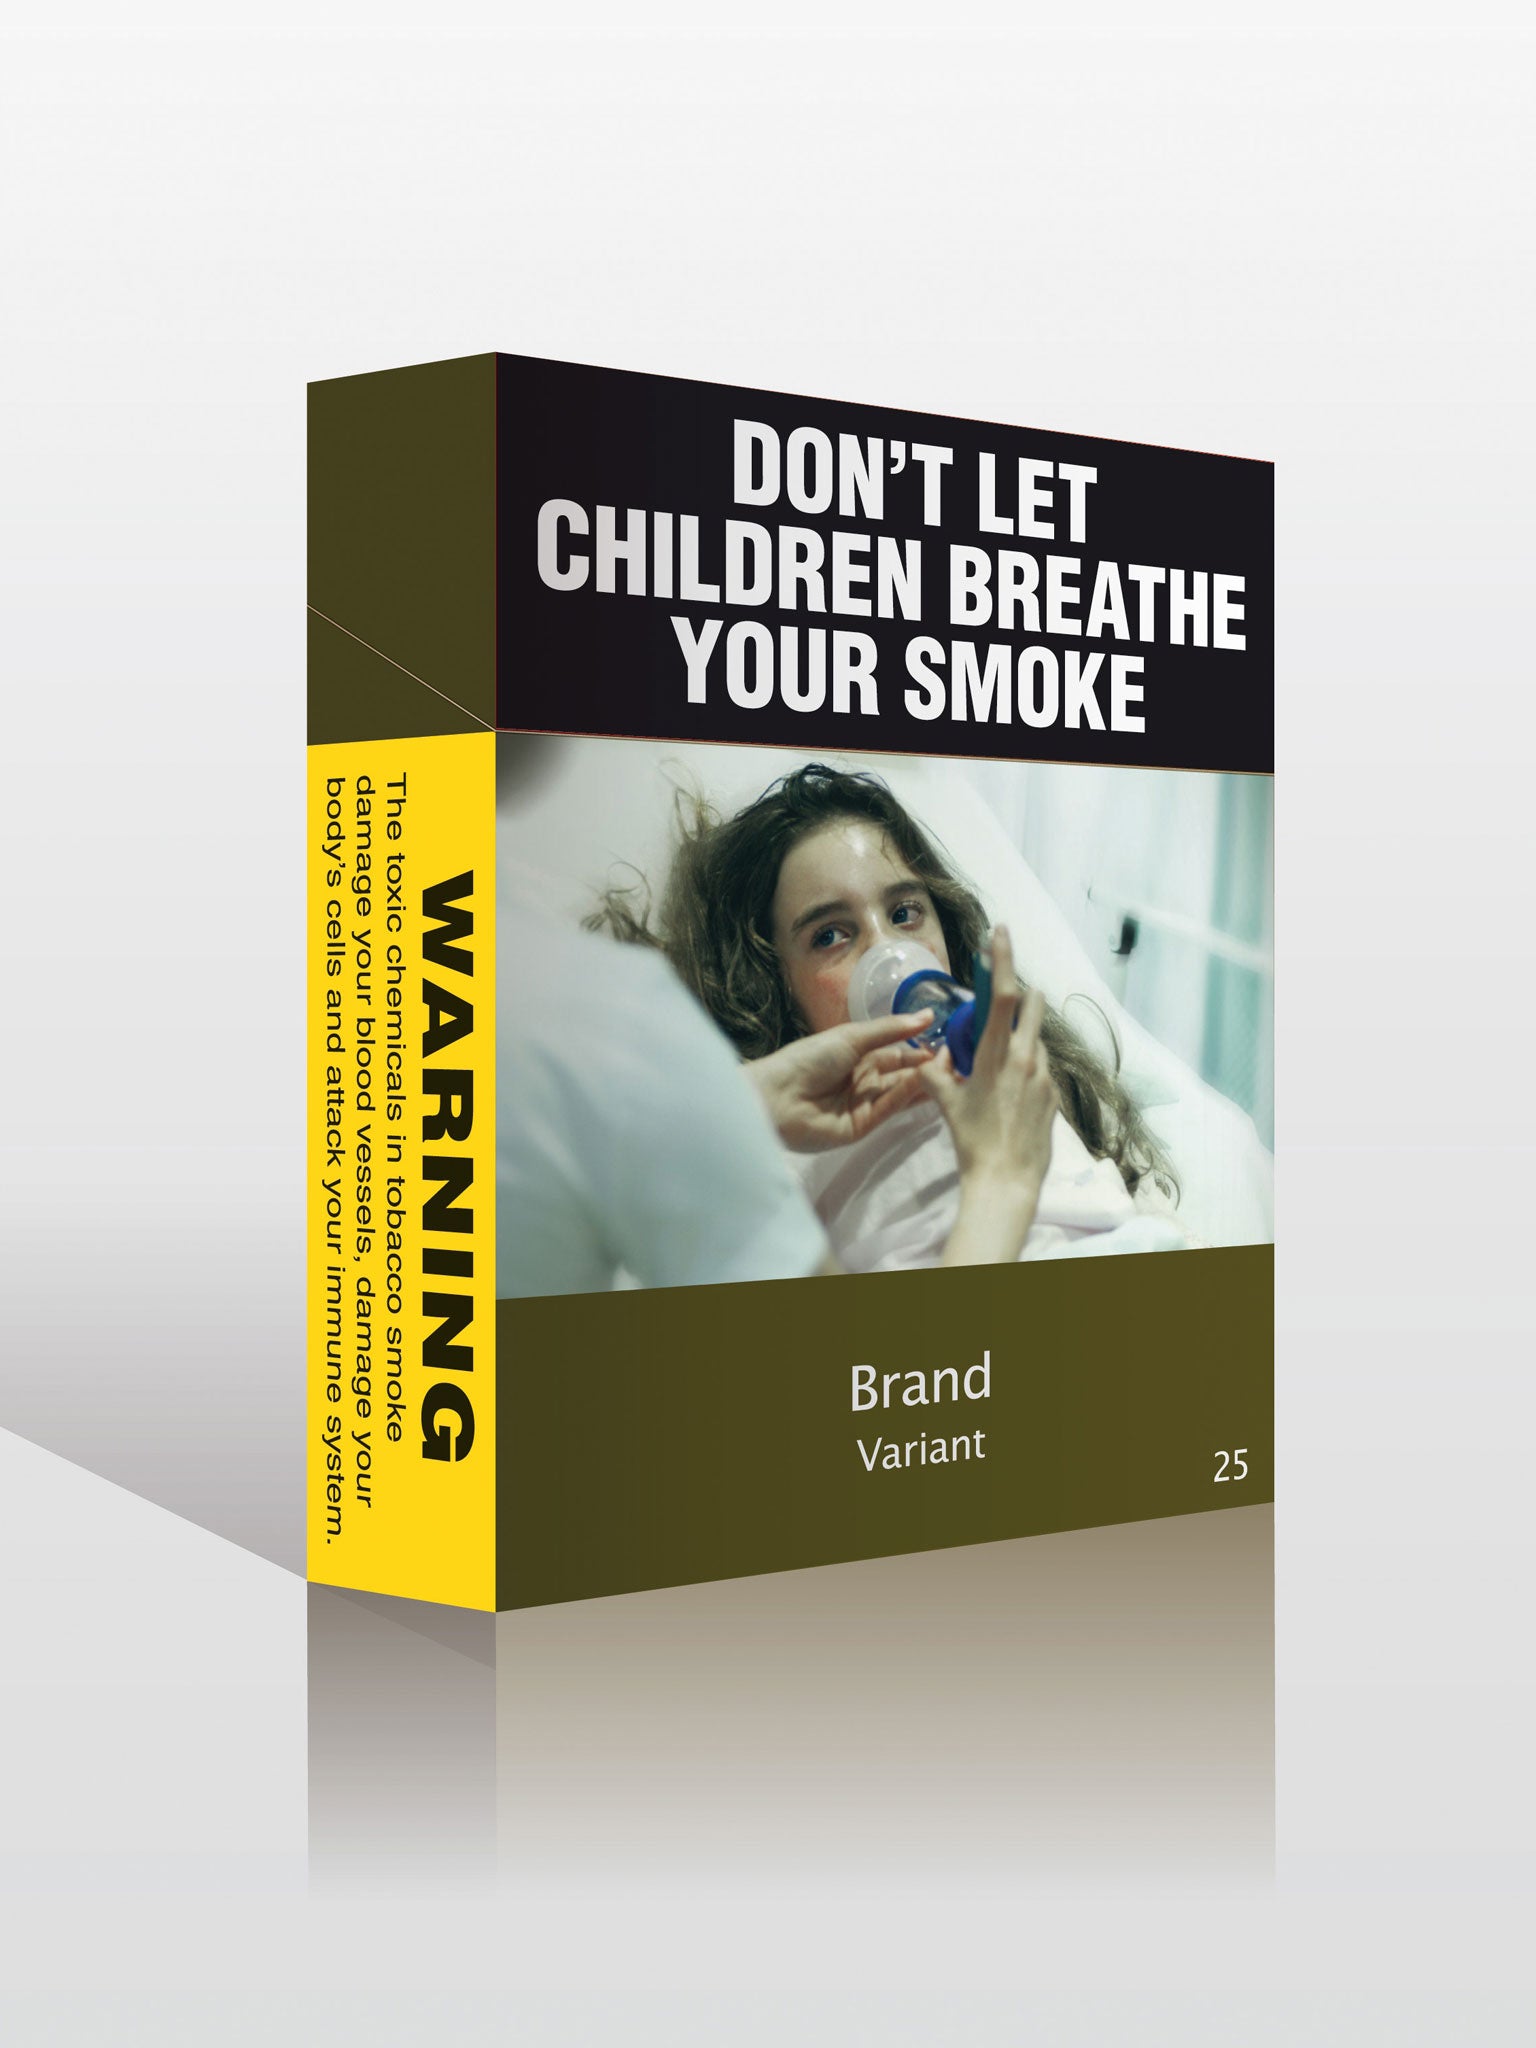 A proposed model of an unbranded cigarettes pack